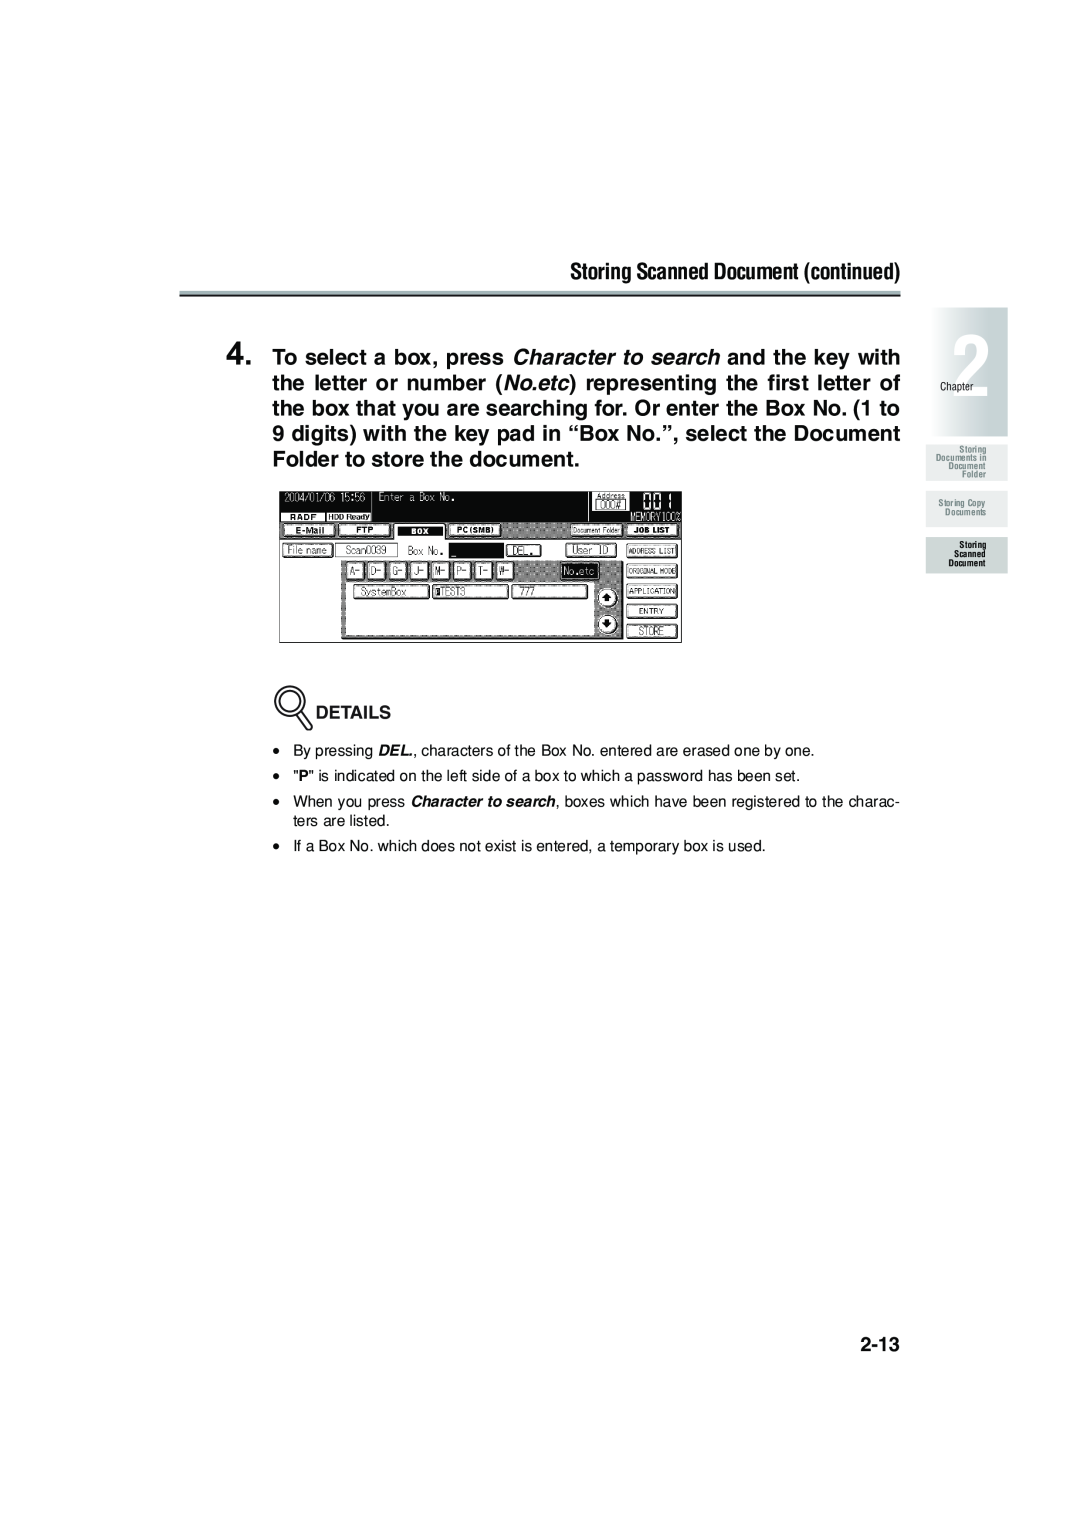 Konica Minolta 7222 manual Storing Scanned Document continued 